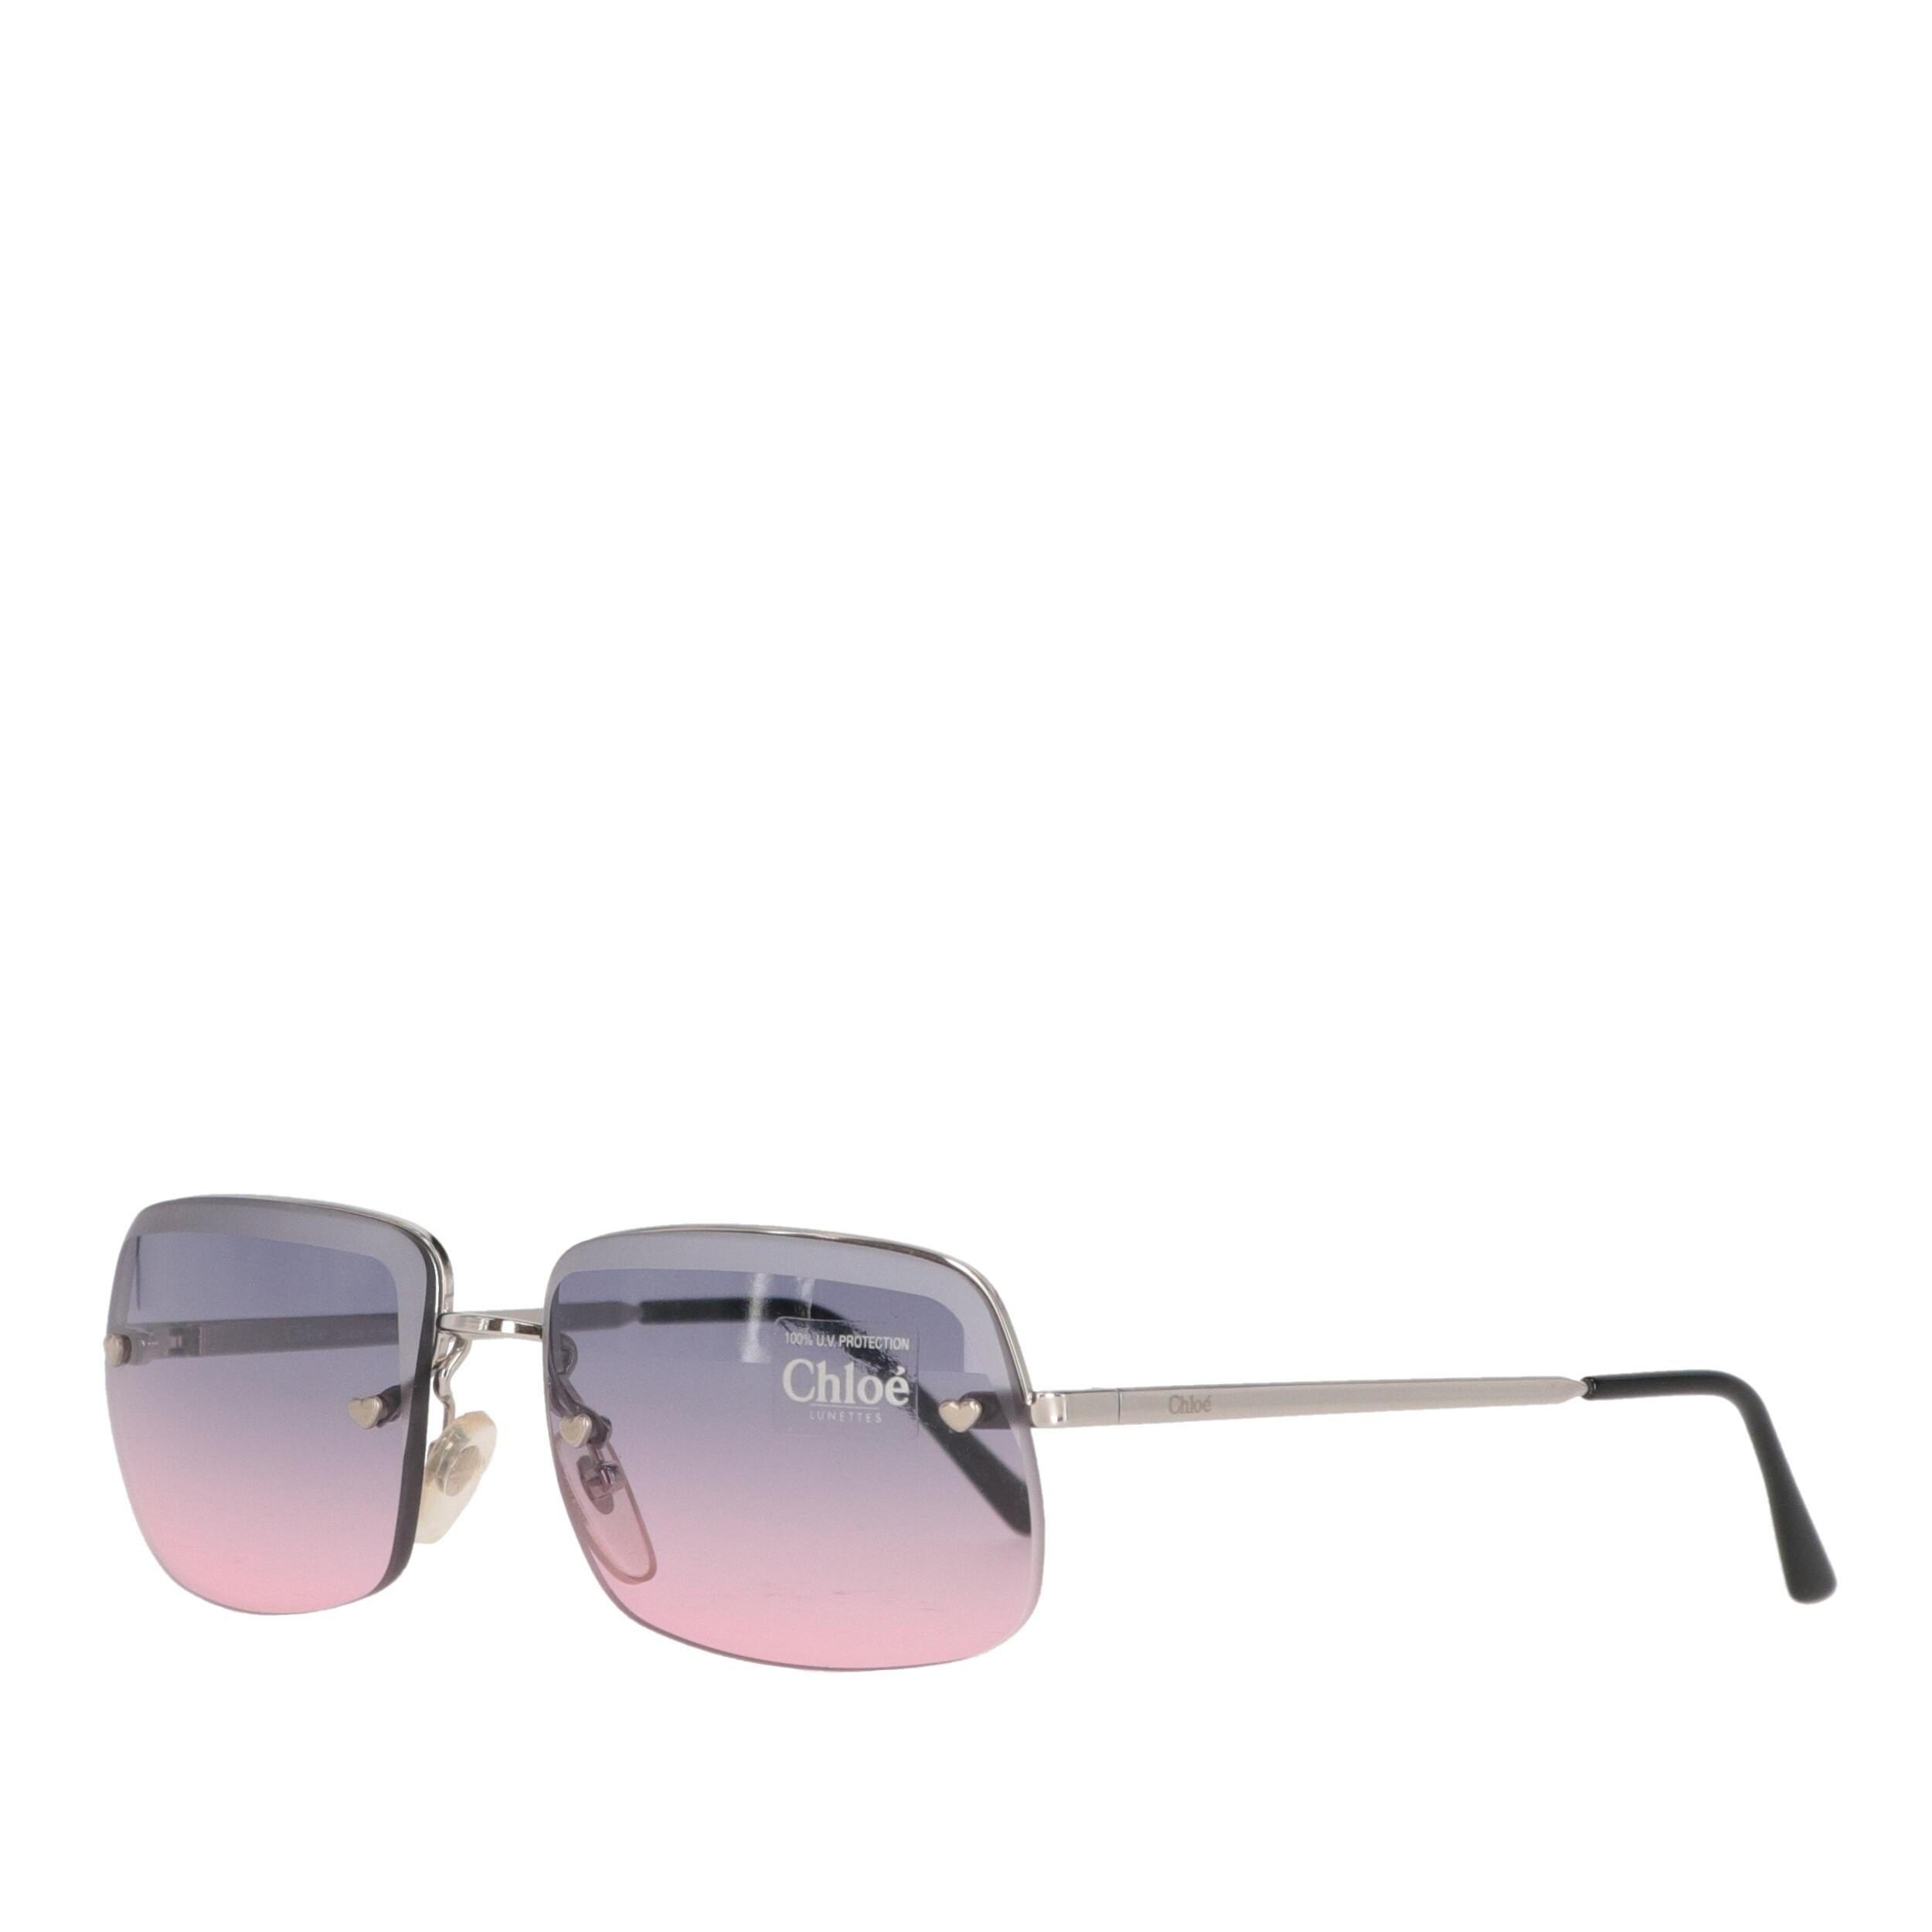 Chloé sunglasses with silver-tone thin metal frame and pink gradient lenses.

Please note, this item cannot be shipped to the US.
Years: 2000s

Made in Italy

Width: 14 cm
Height: 4,5 cm